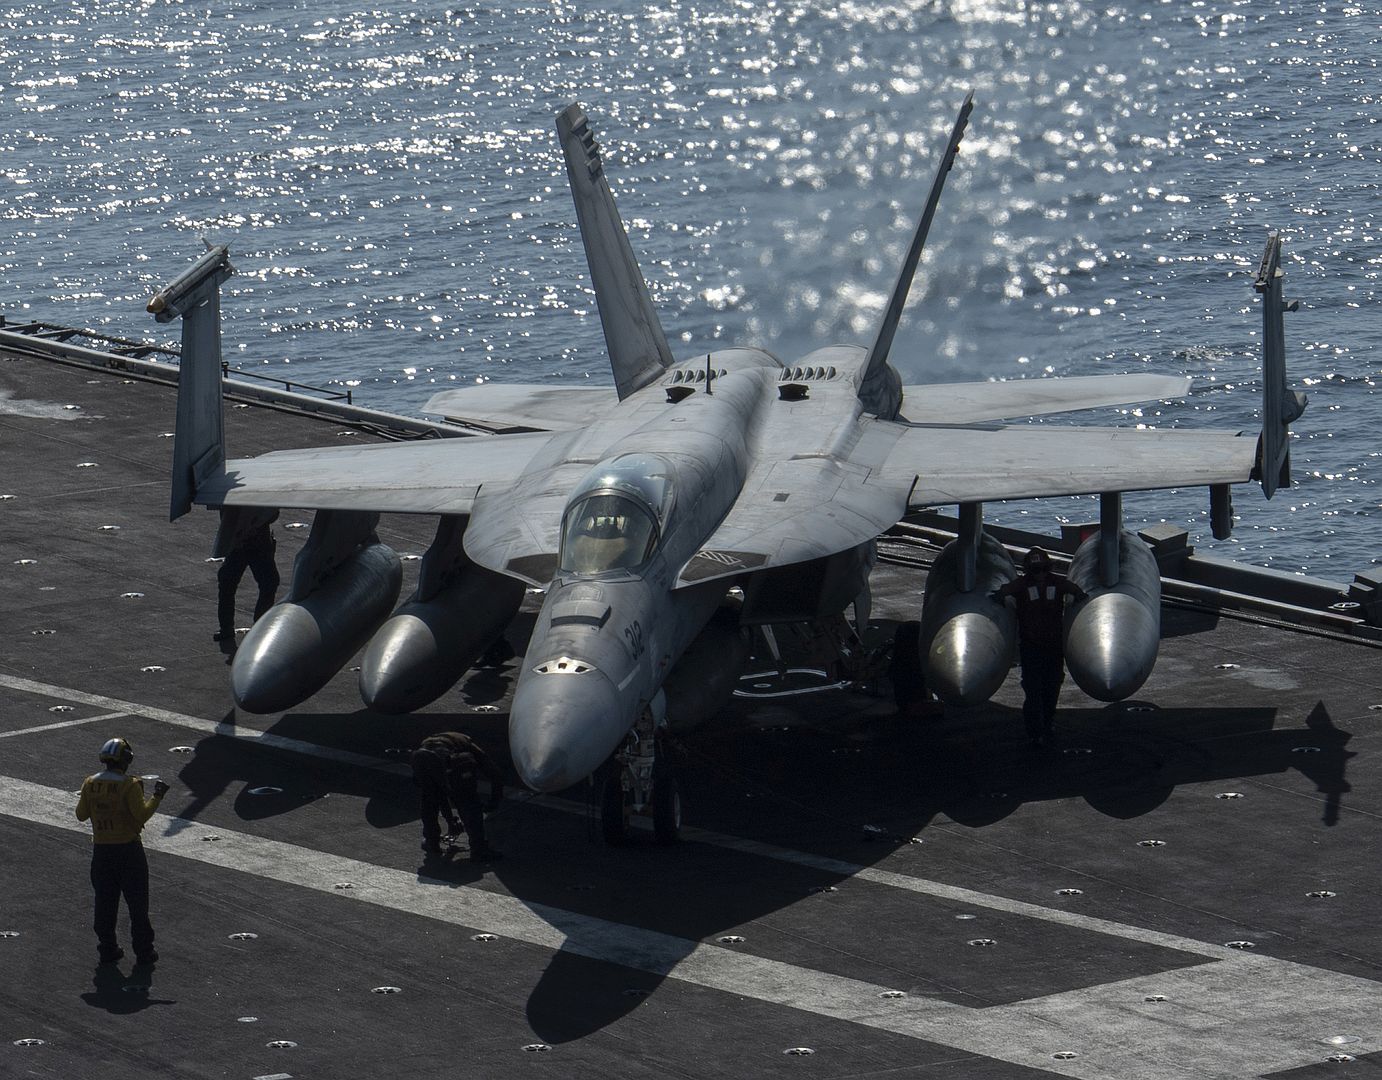 FA 18E Super Hornet From The Kestrels Of Strike Fighter Squadron VFA 137 On The Flight Deck Of The Aircraft Carrier USS Nimitz